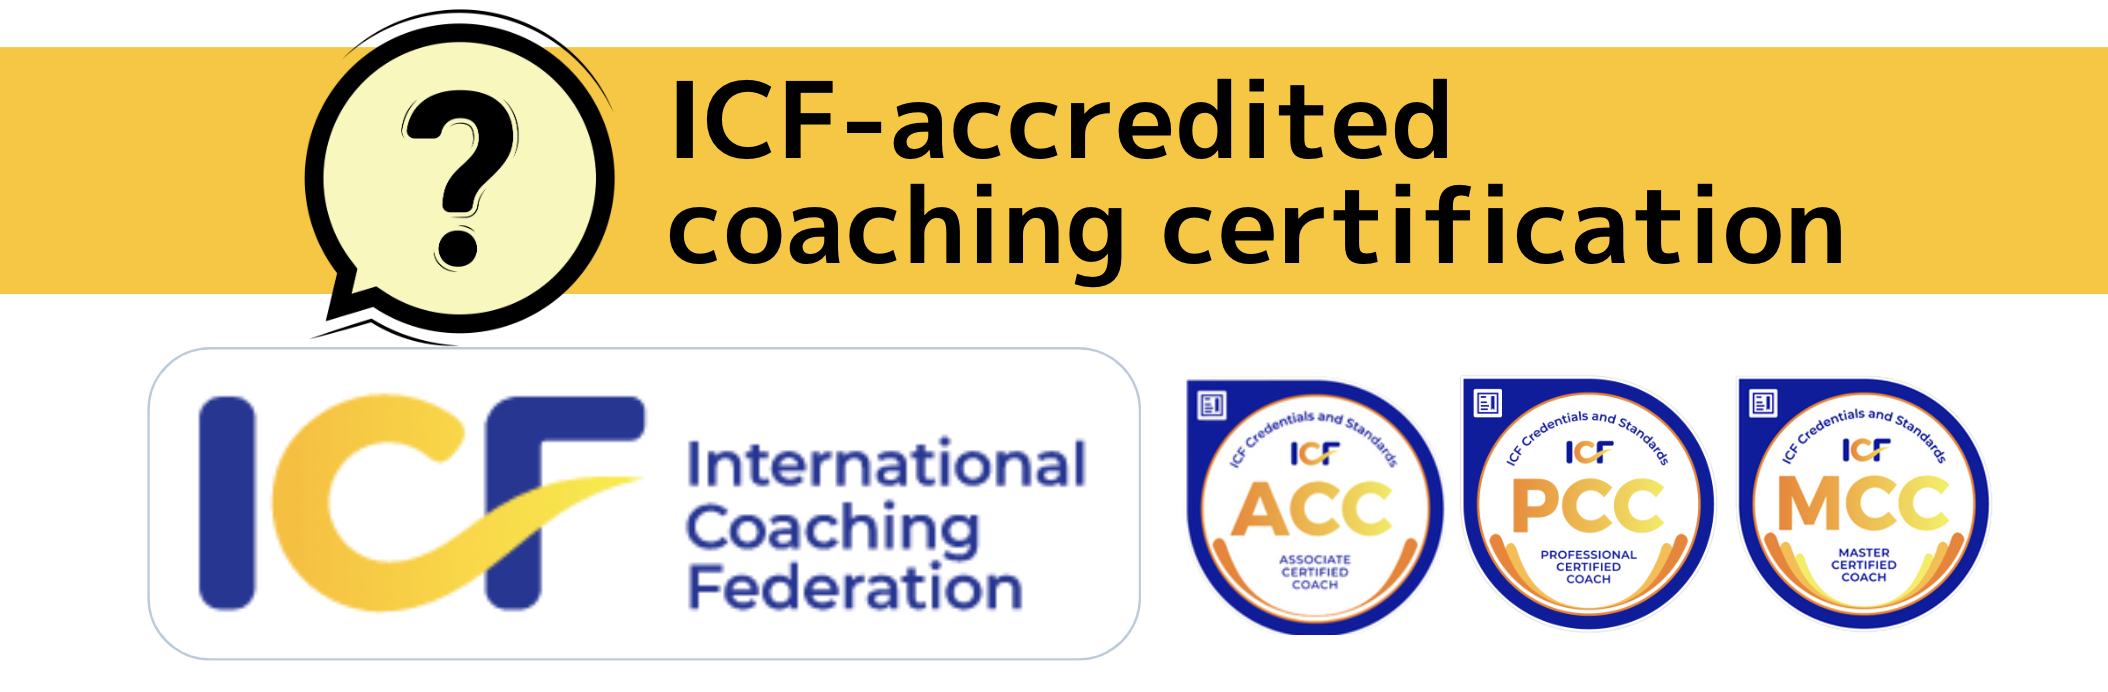 ICF-accredited coaching certification意味